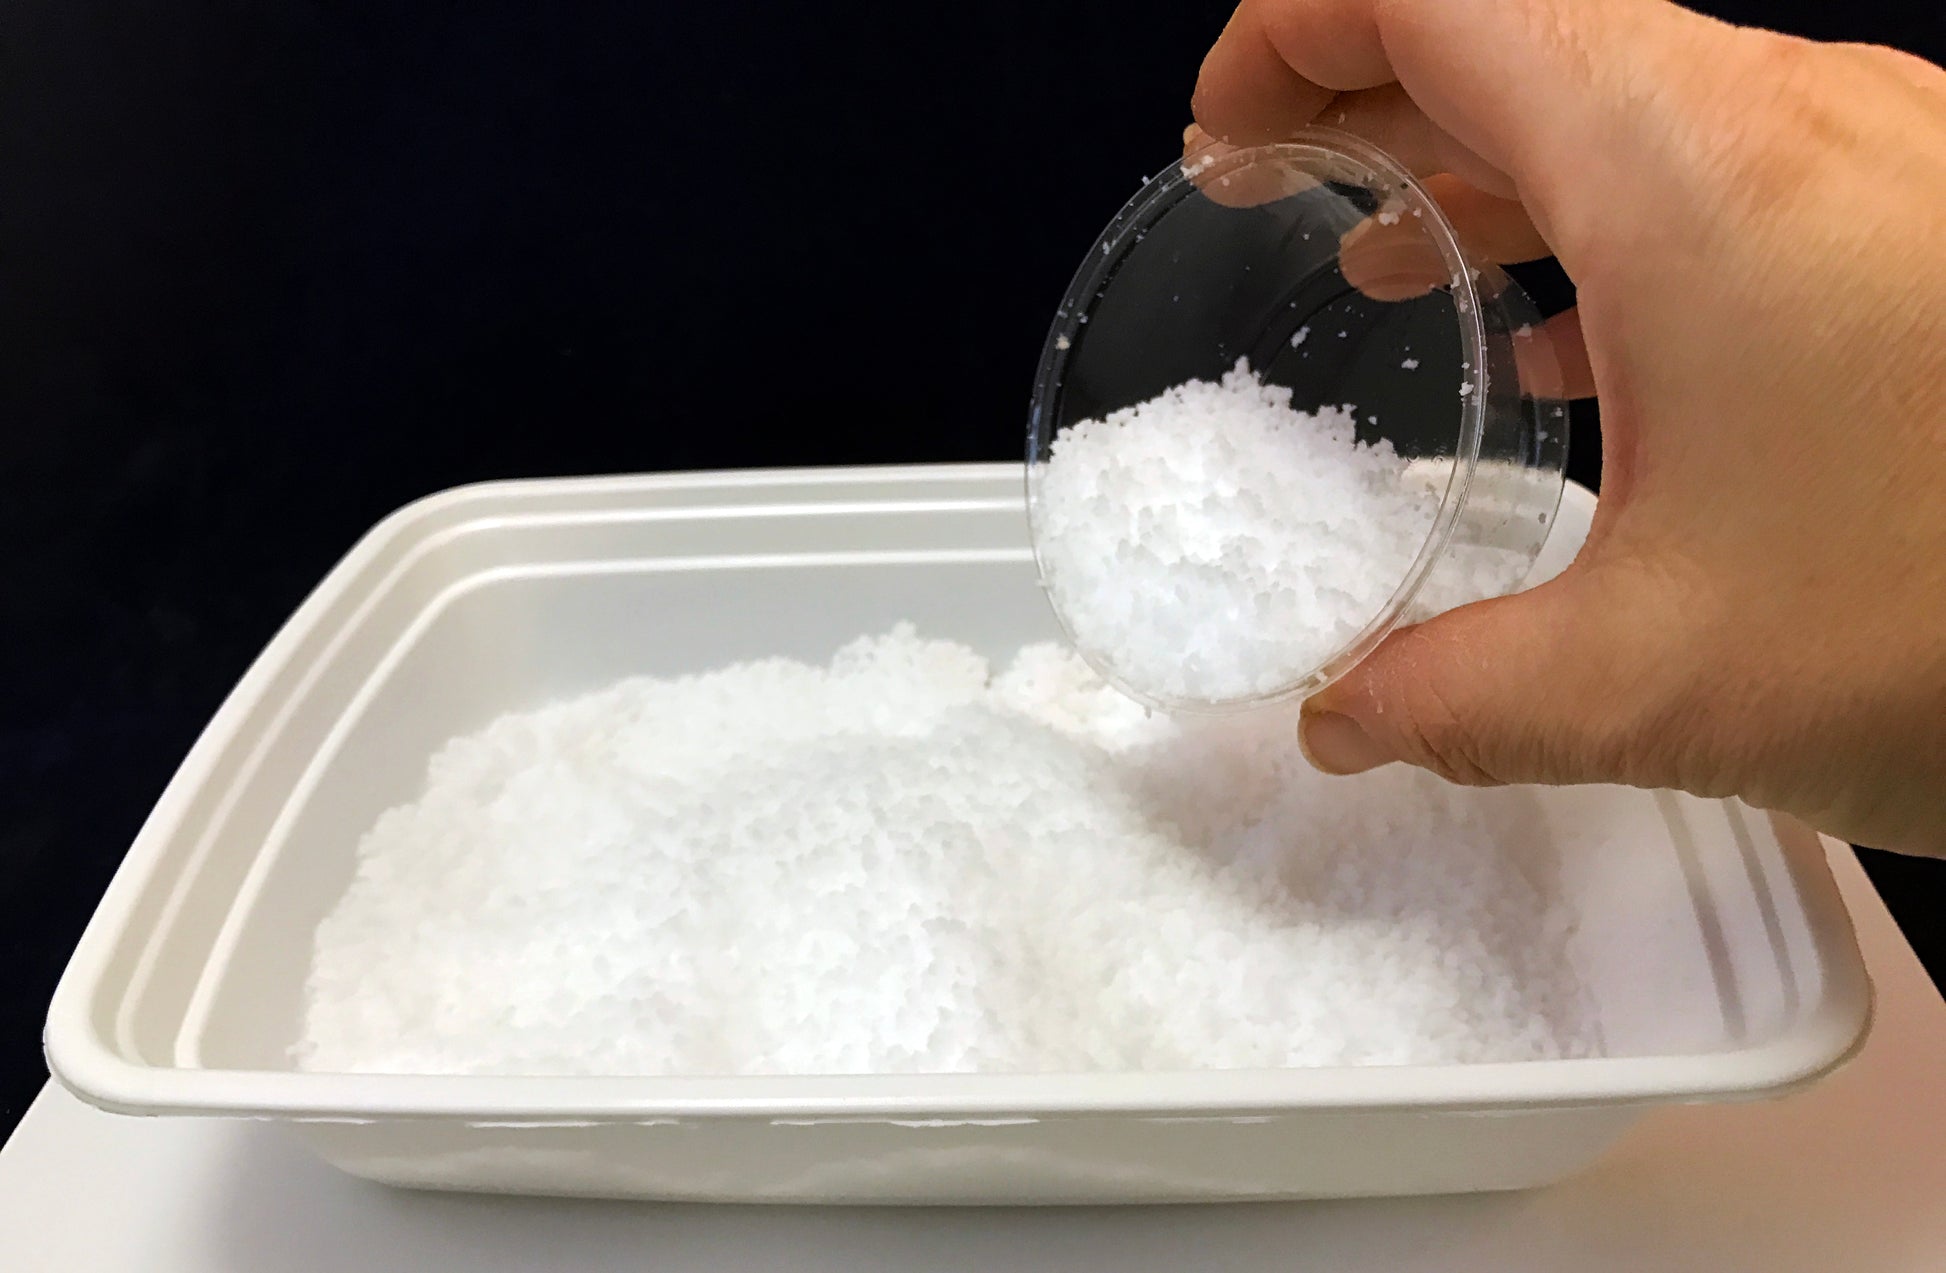 Make your own play snow with instant snow powder - super absorbent polymer makes lots of fluffy snow